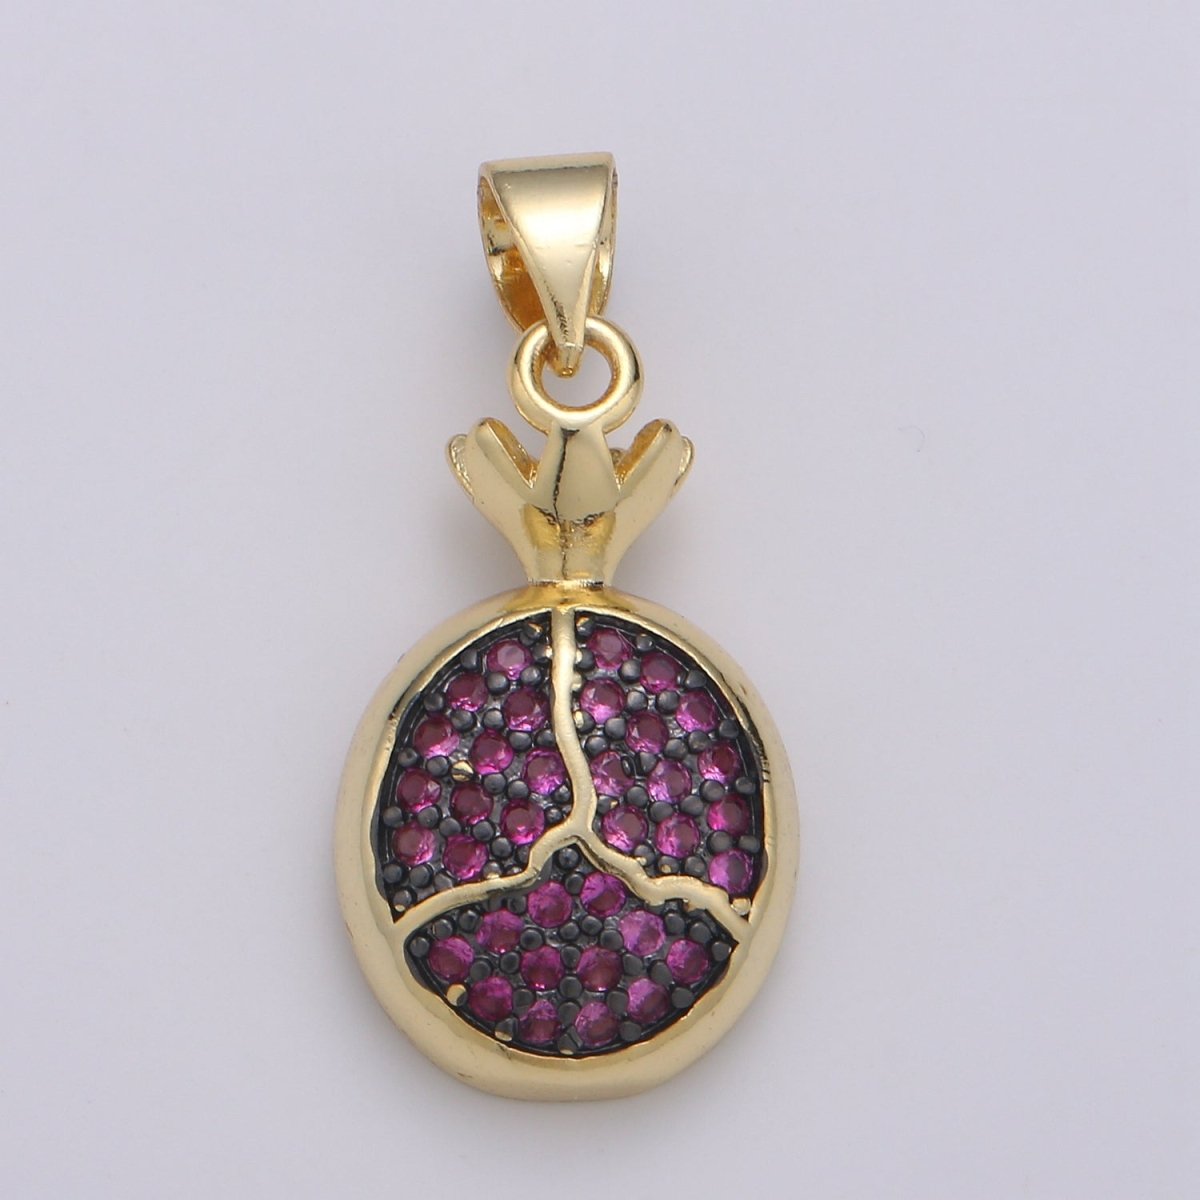 Dainty Pomegranate 24K Gold Filled Charm, Purple Seed Fruit Pendant Charm, Dainty Charm, Green Leaf Pendant, Gold Color PDGF-2090 - DLUXCA